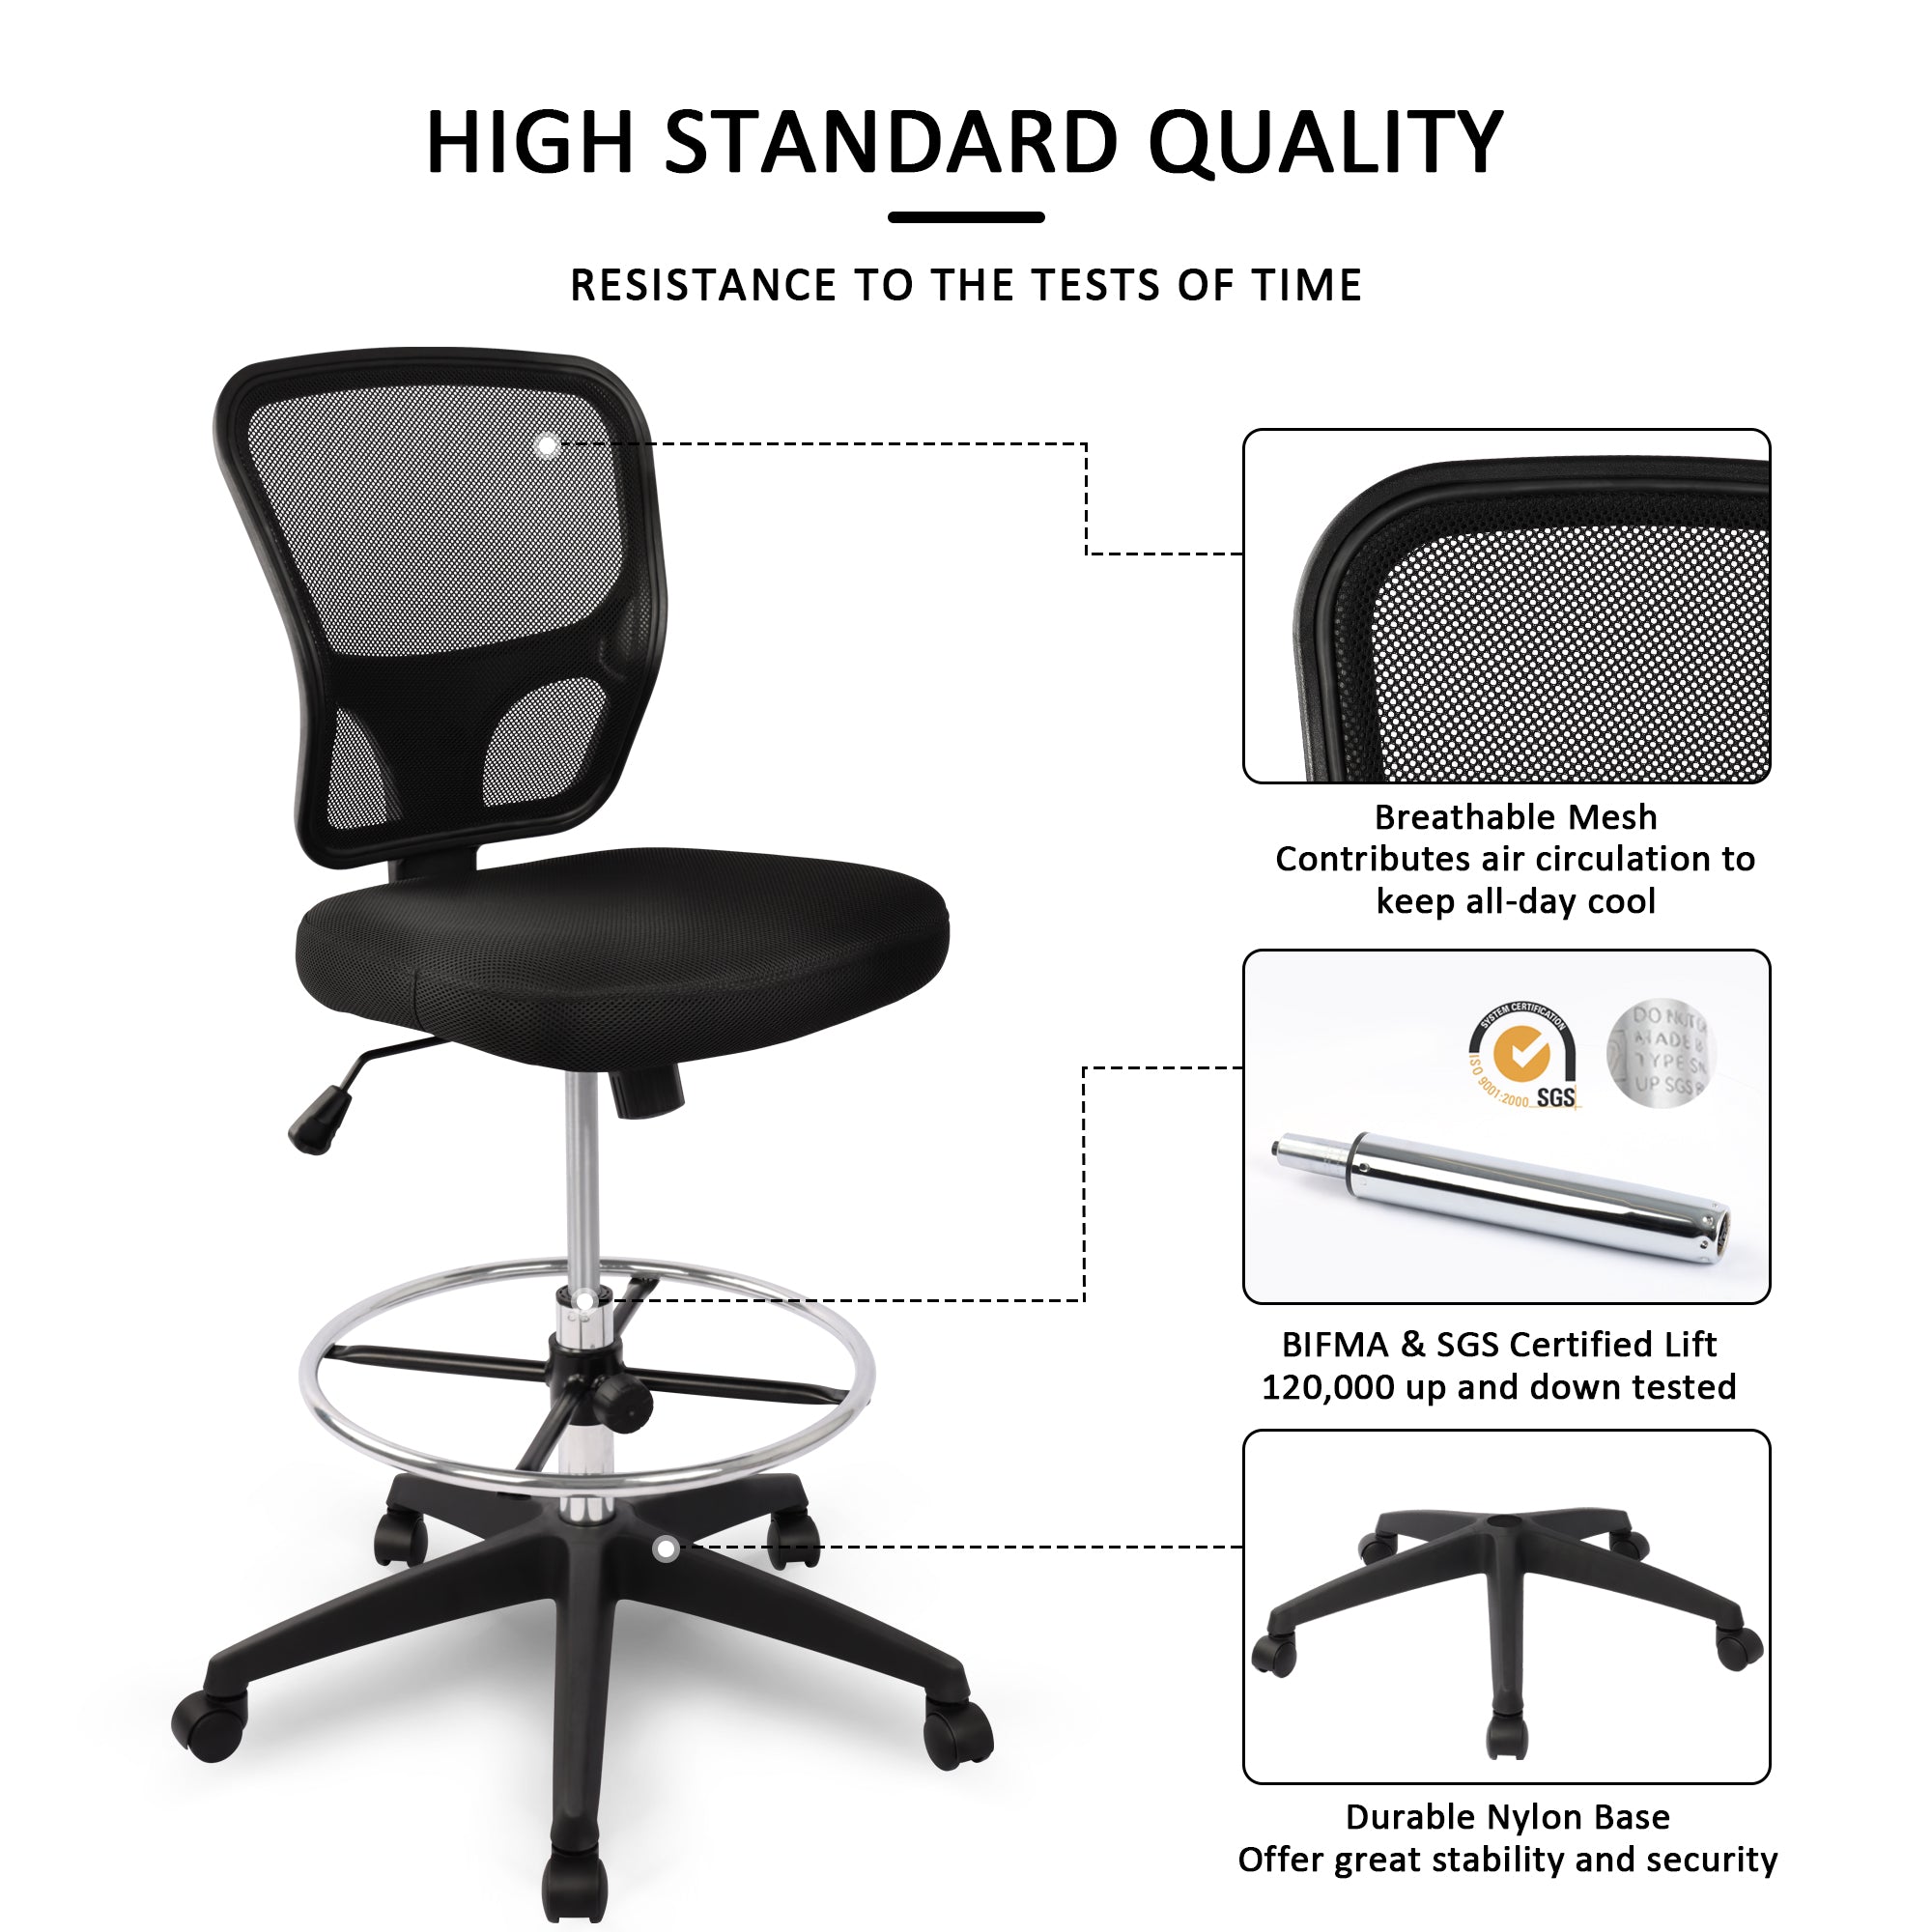 Mesh Drafting Chair Mid Back Office Chair Adjustable Height W